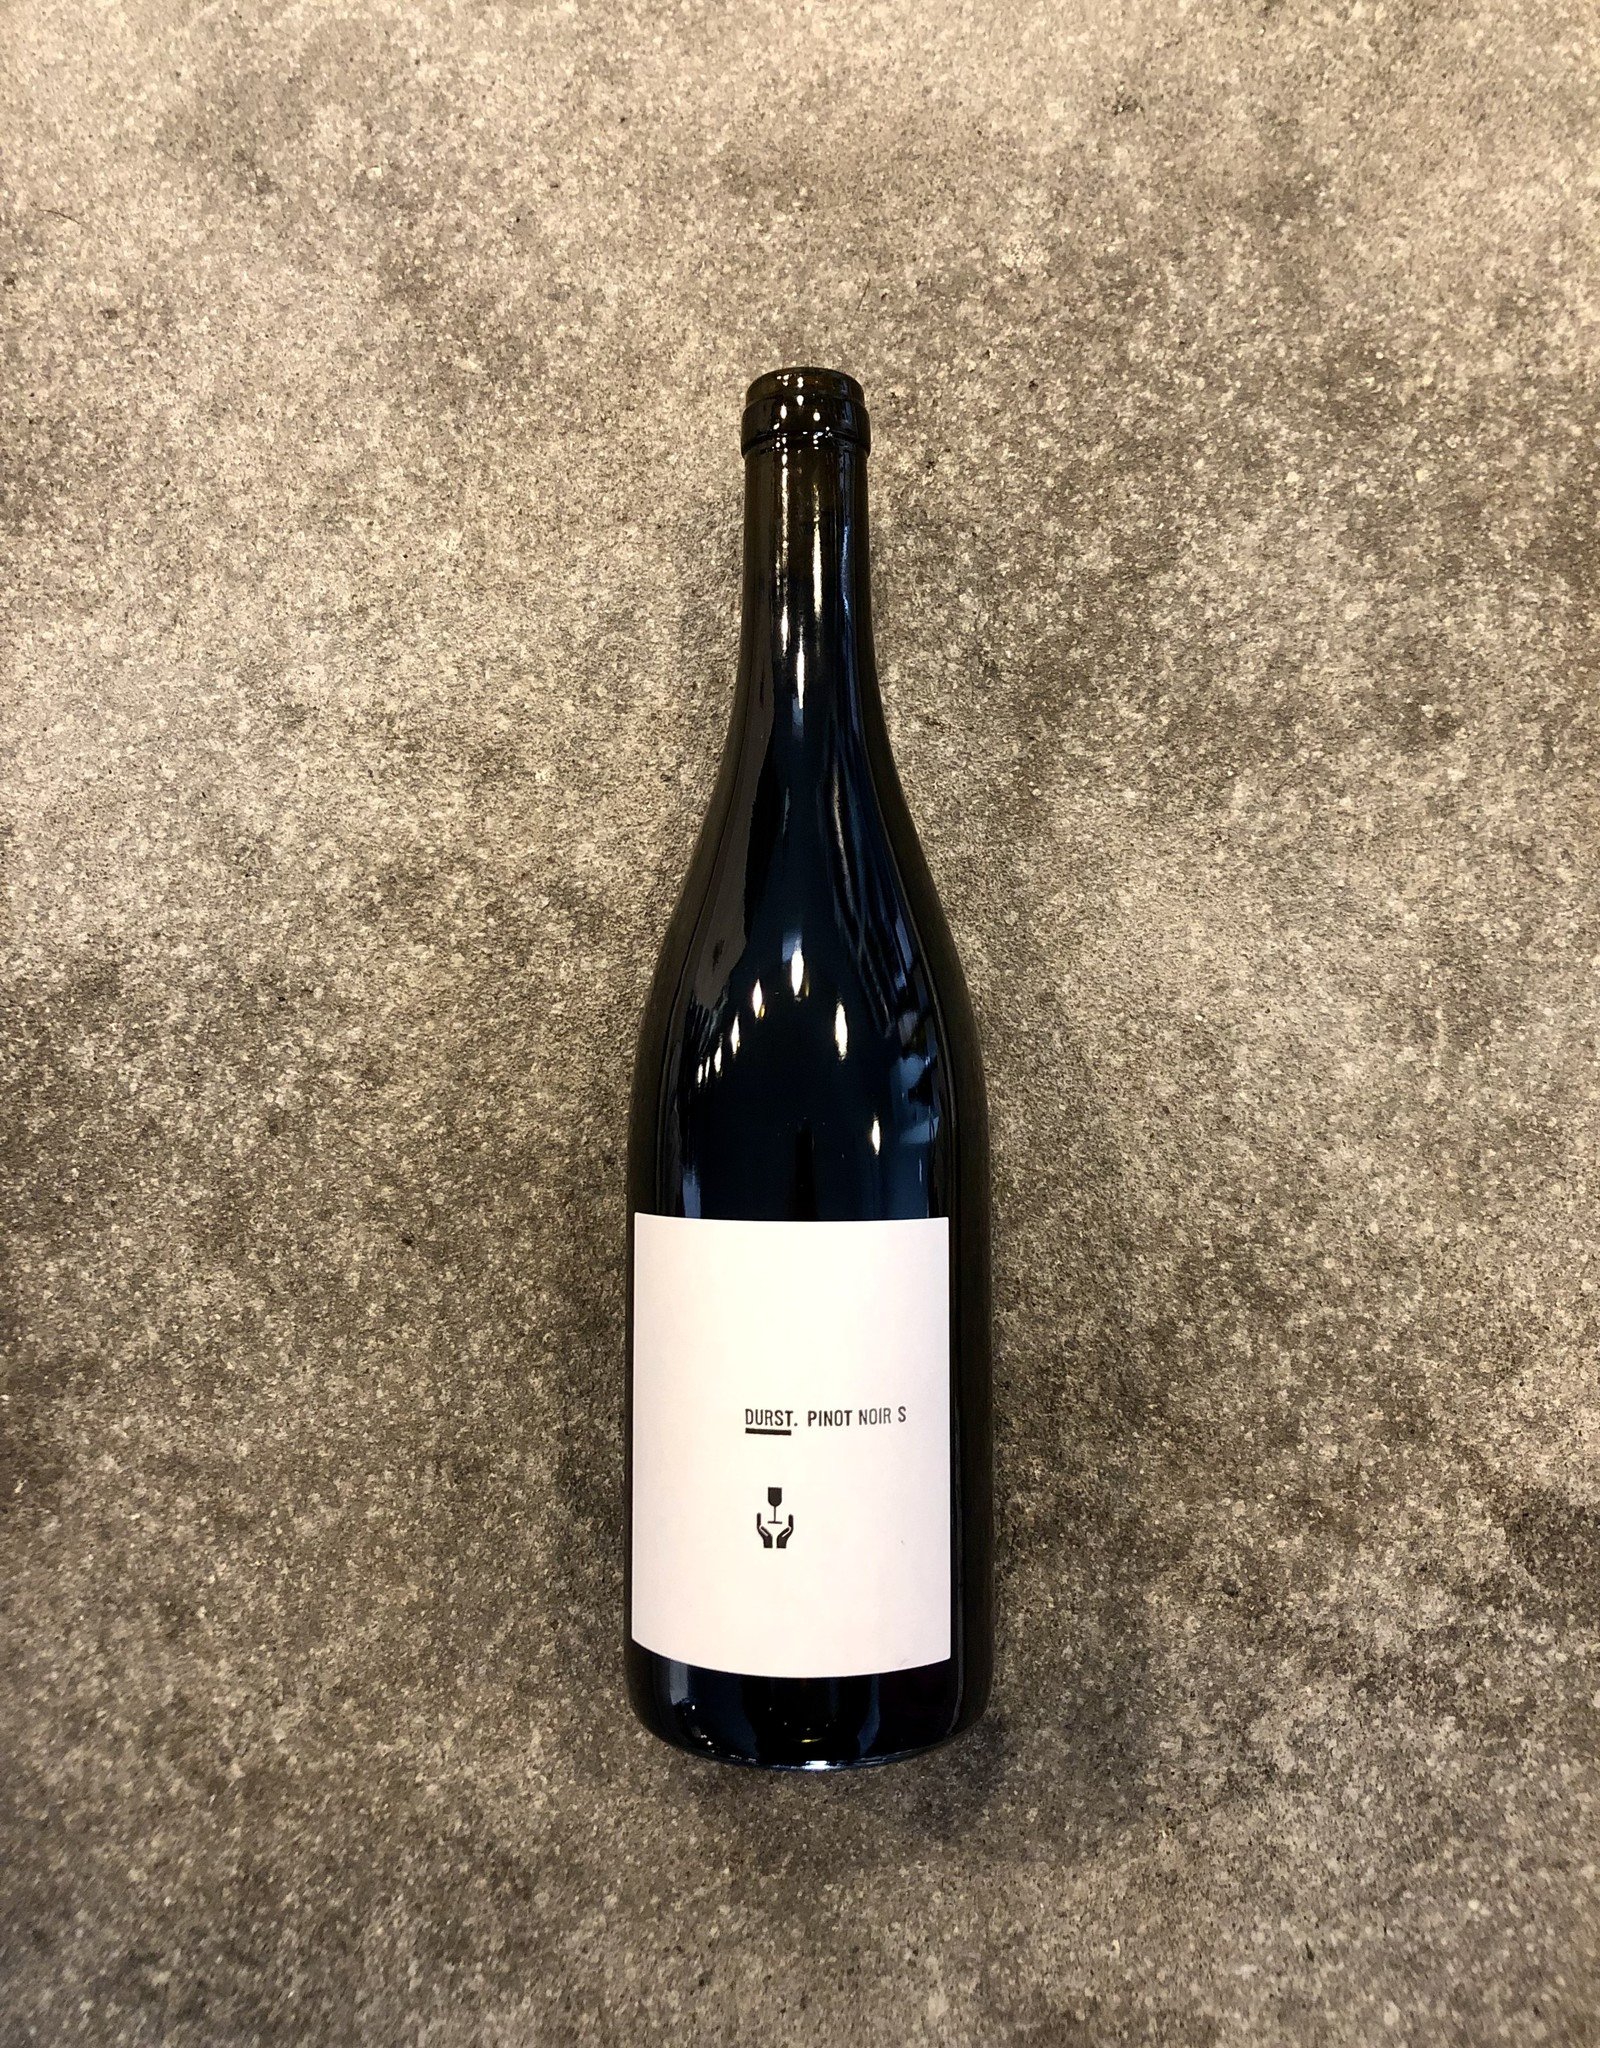 Andreas Durst Pinot Noir S 2016